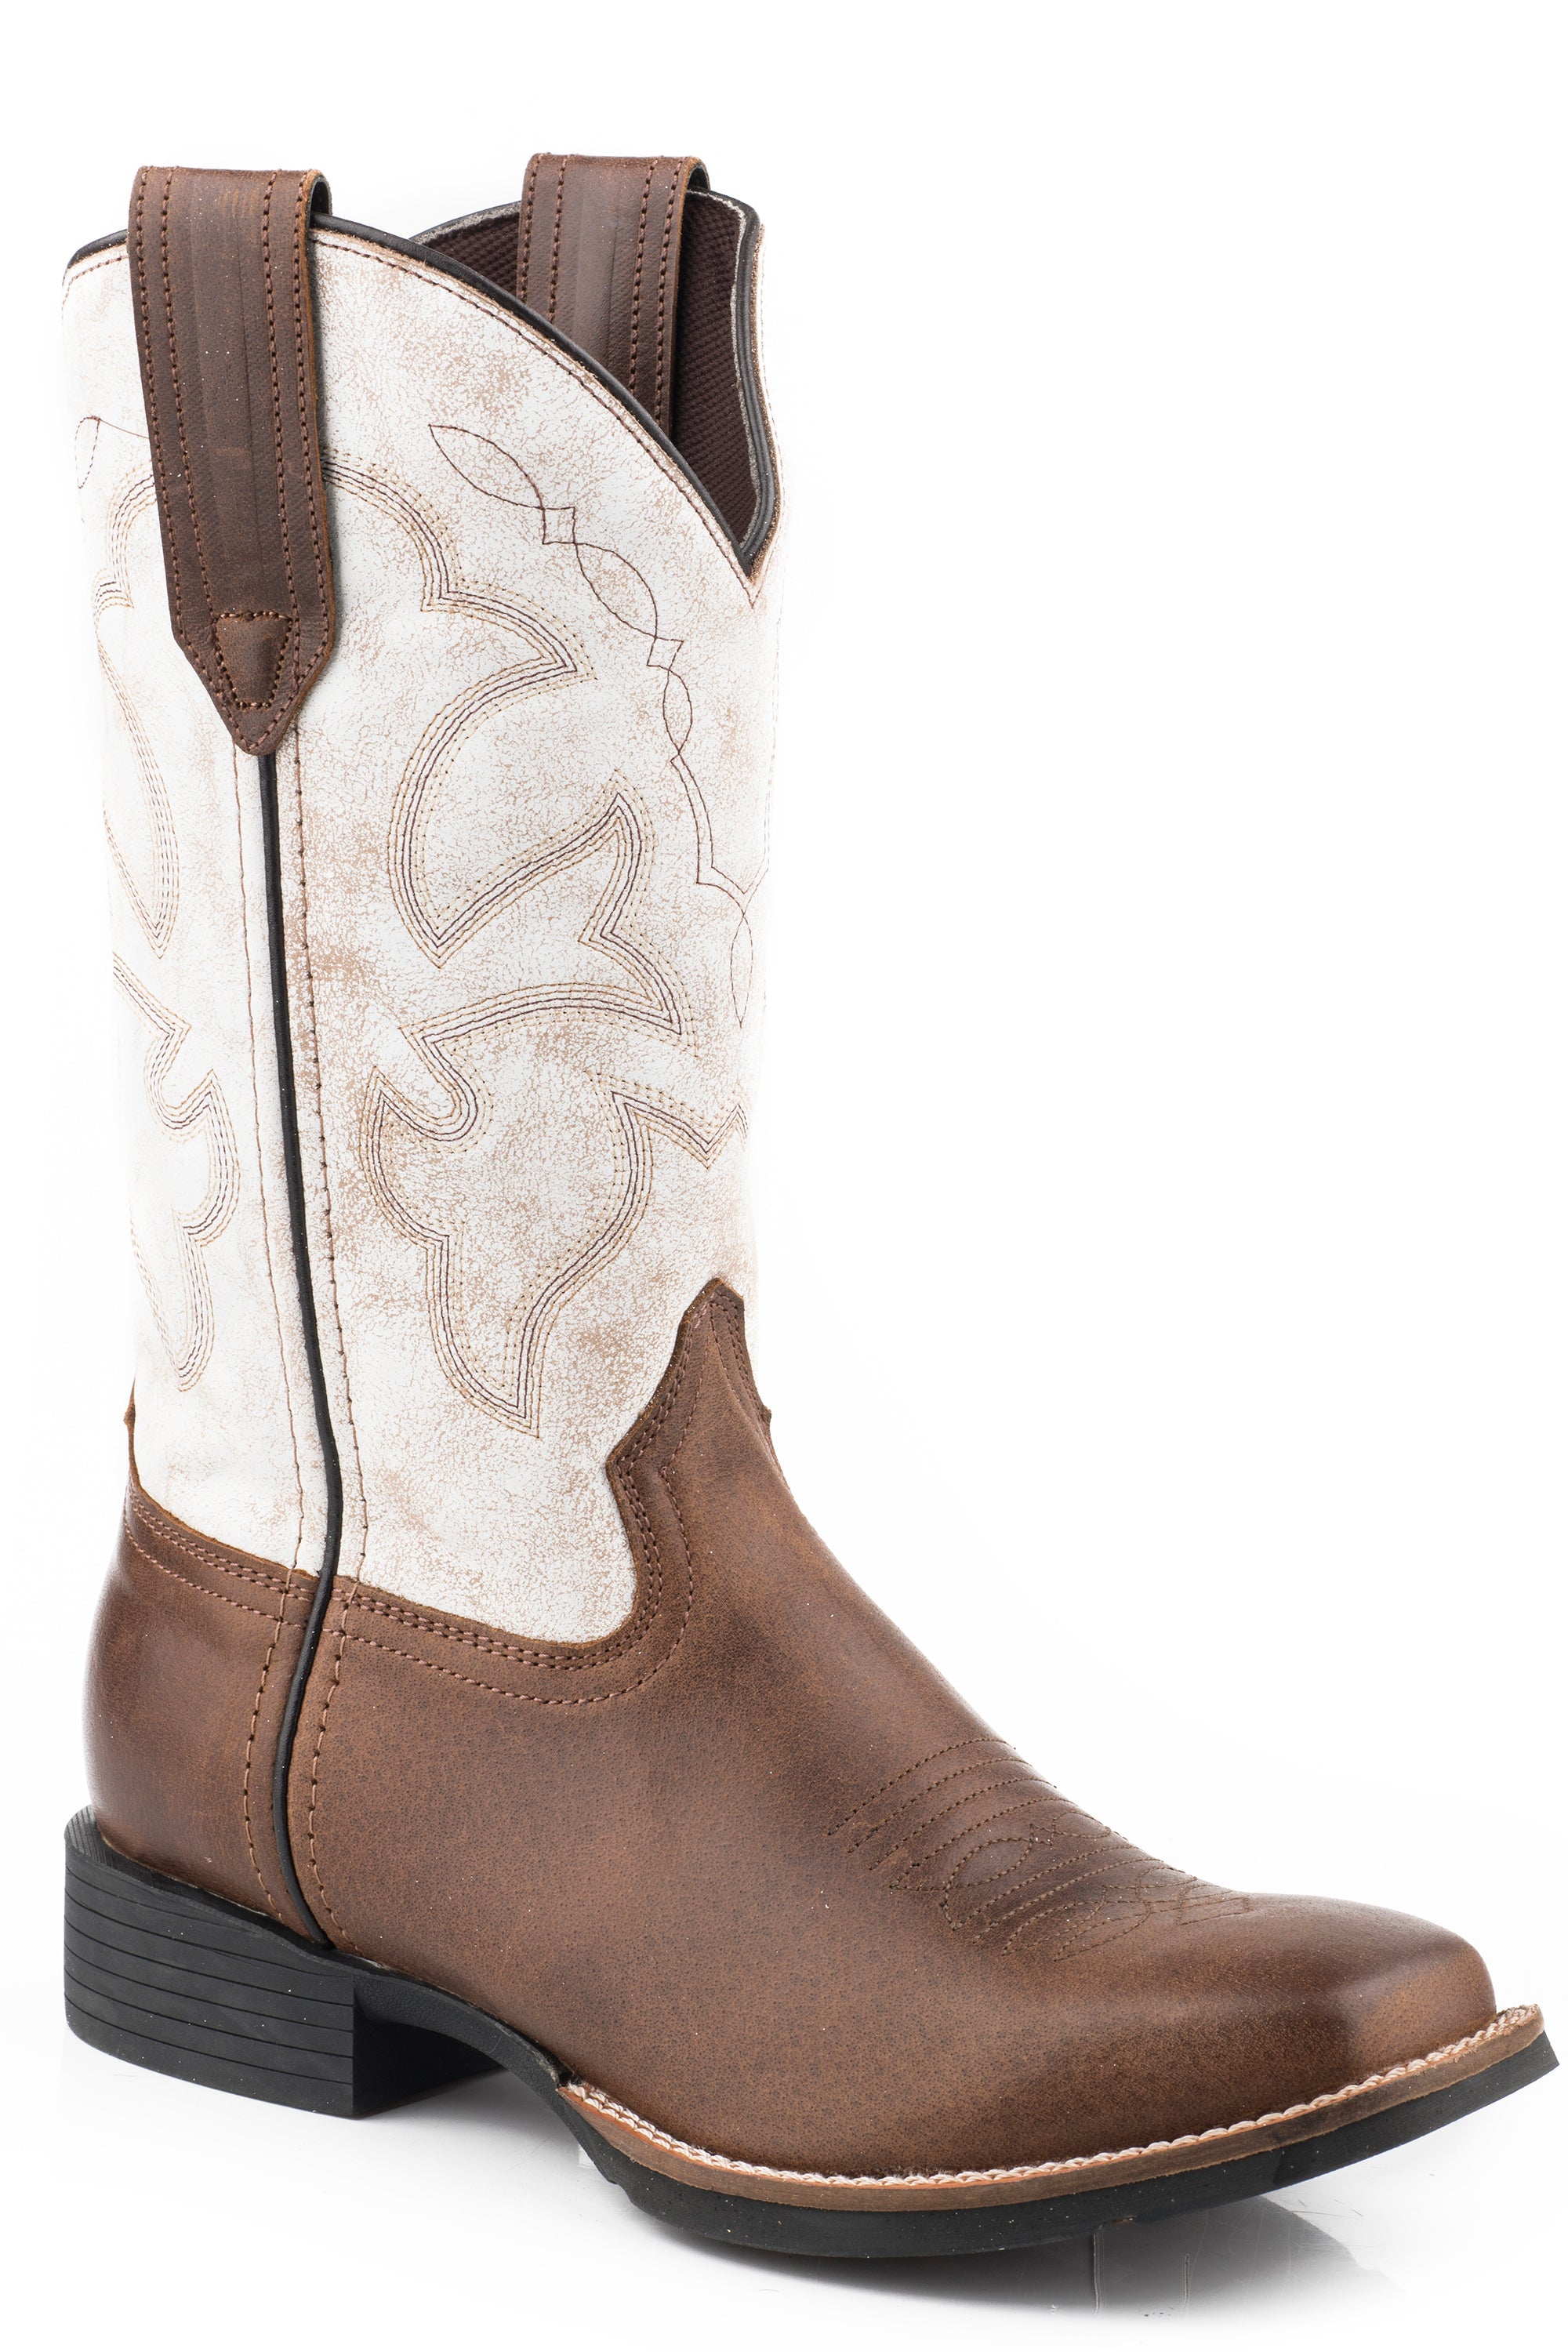 Roper Womens Tan Vamp And White Leather Shaft